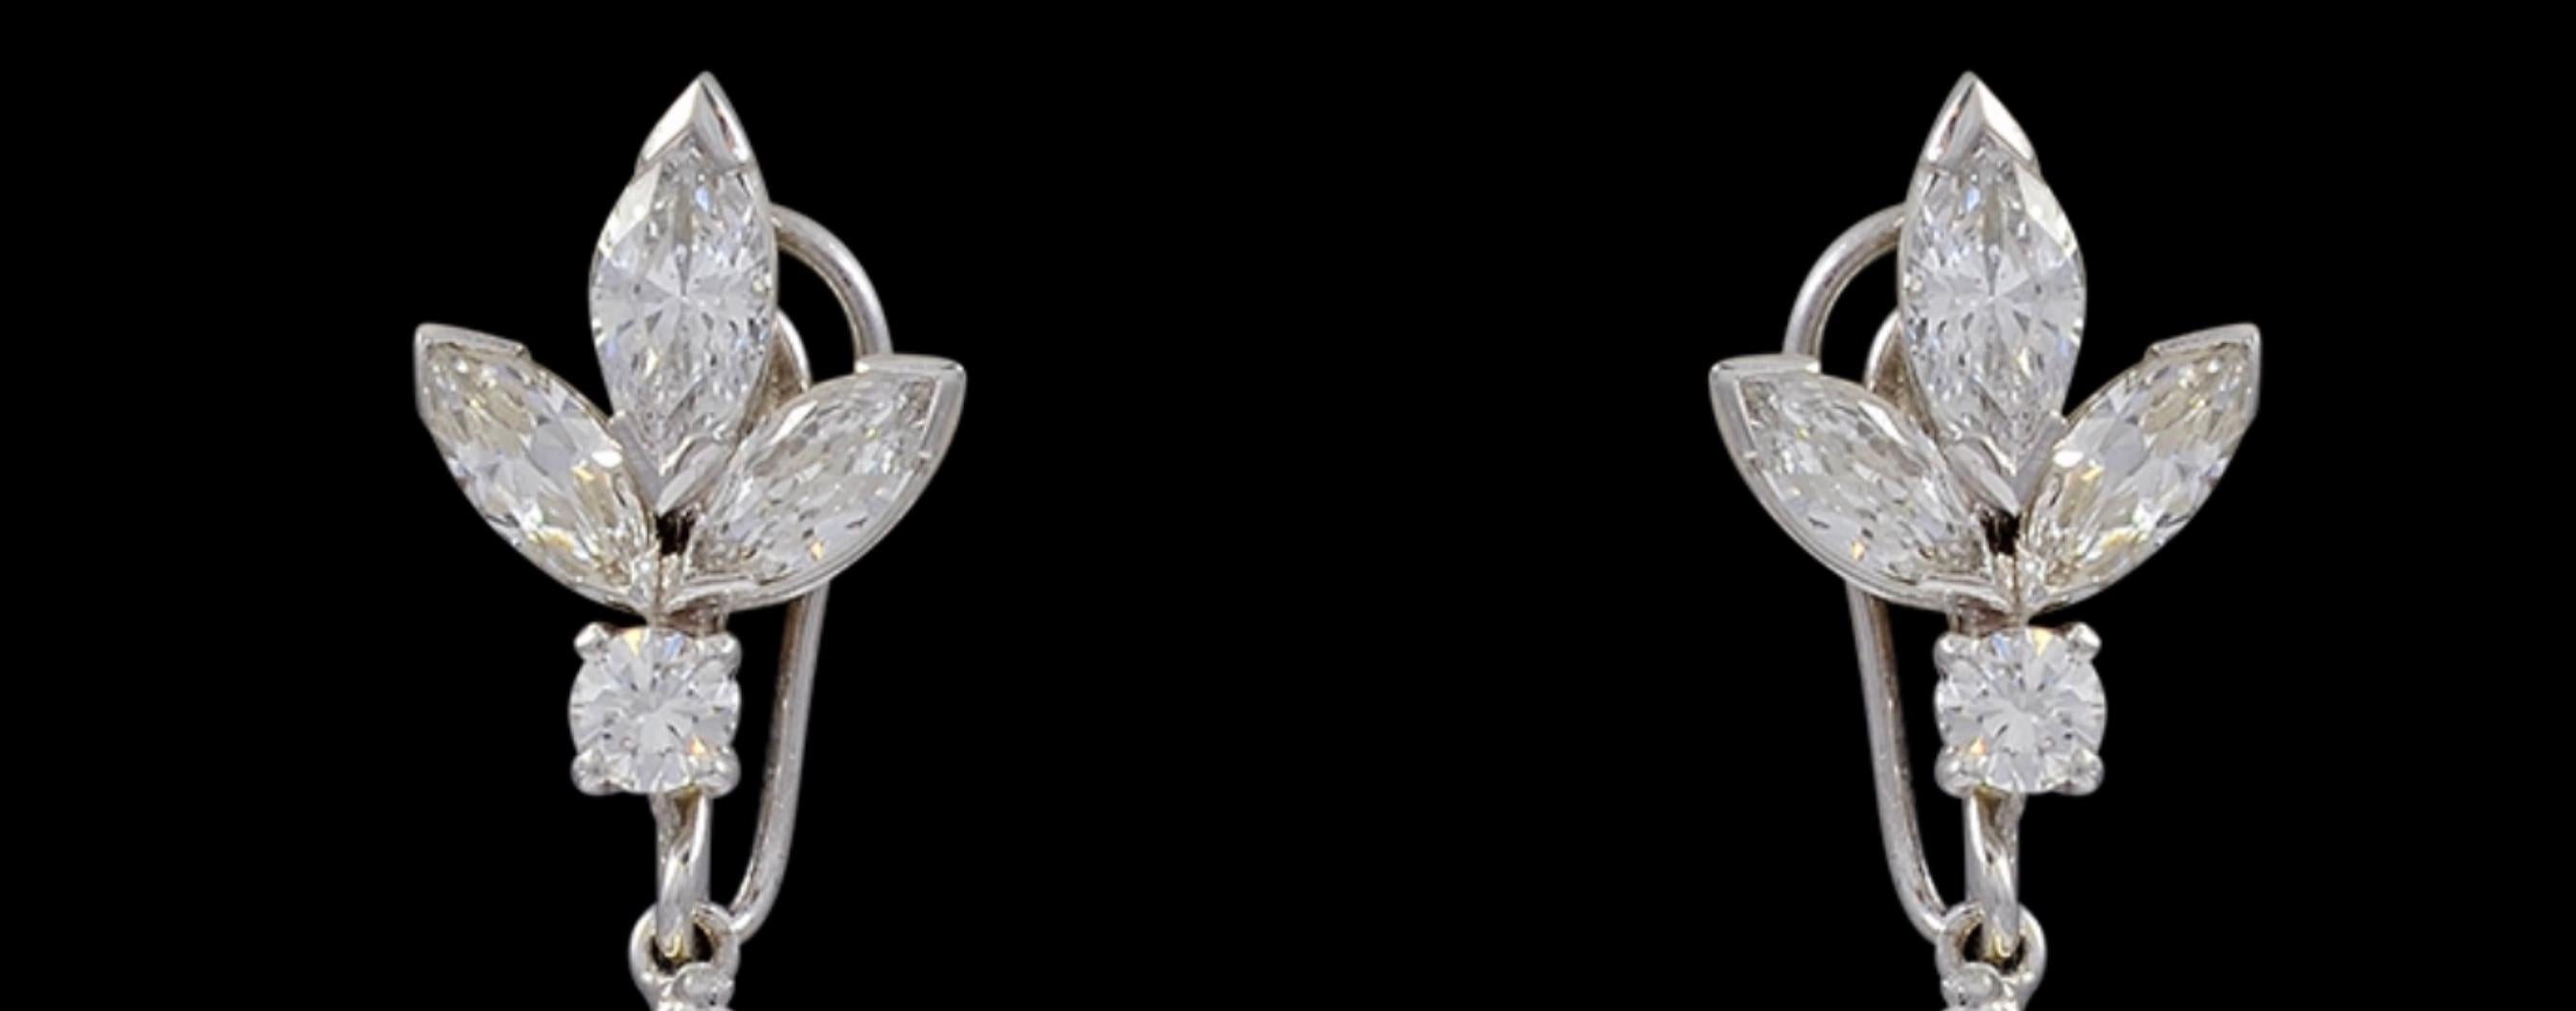 Women's 1950s 12 Ct Day and Night Detachable Diamond Drop Cocktail Earrings in Platinum